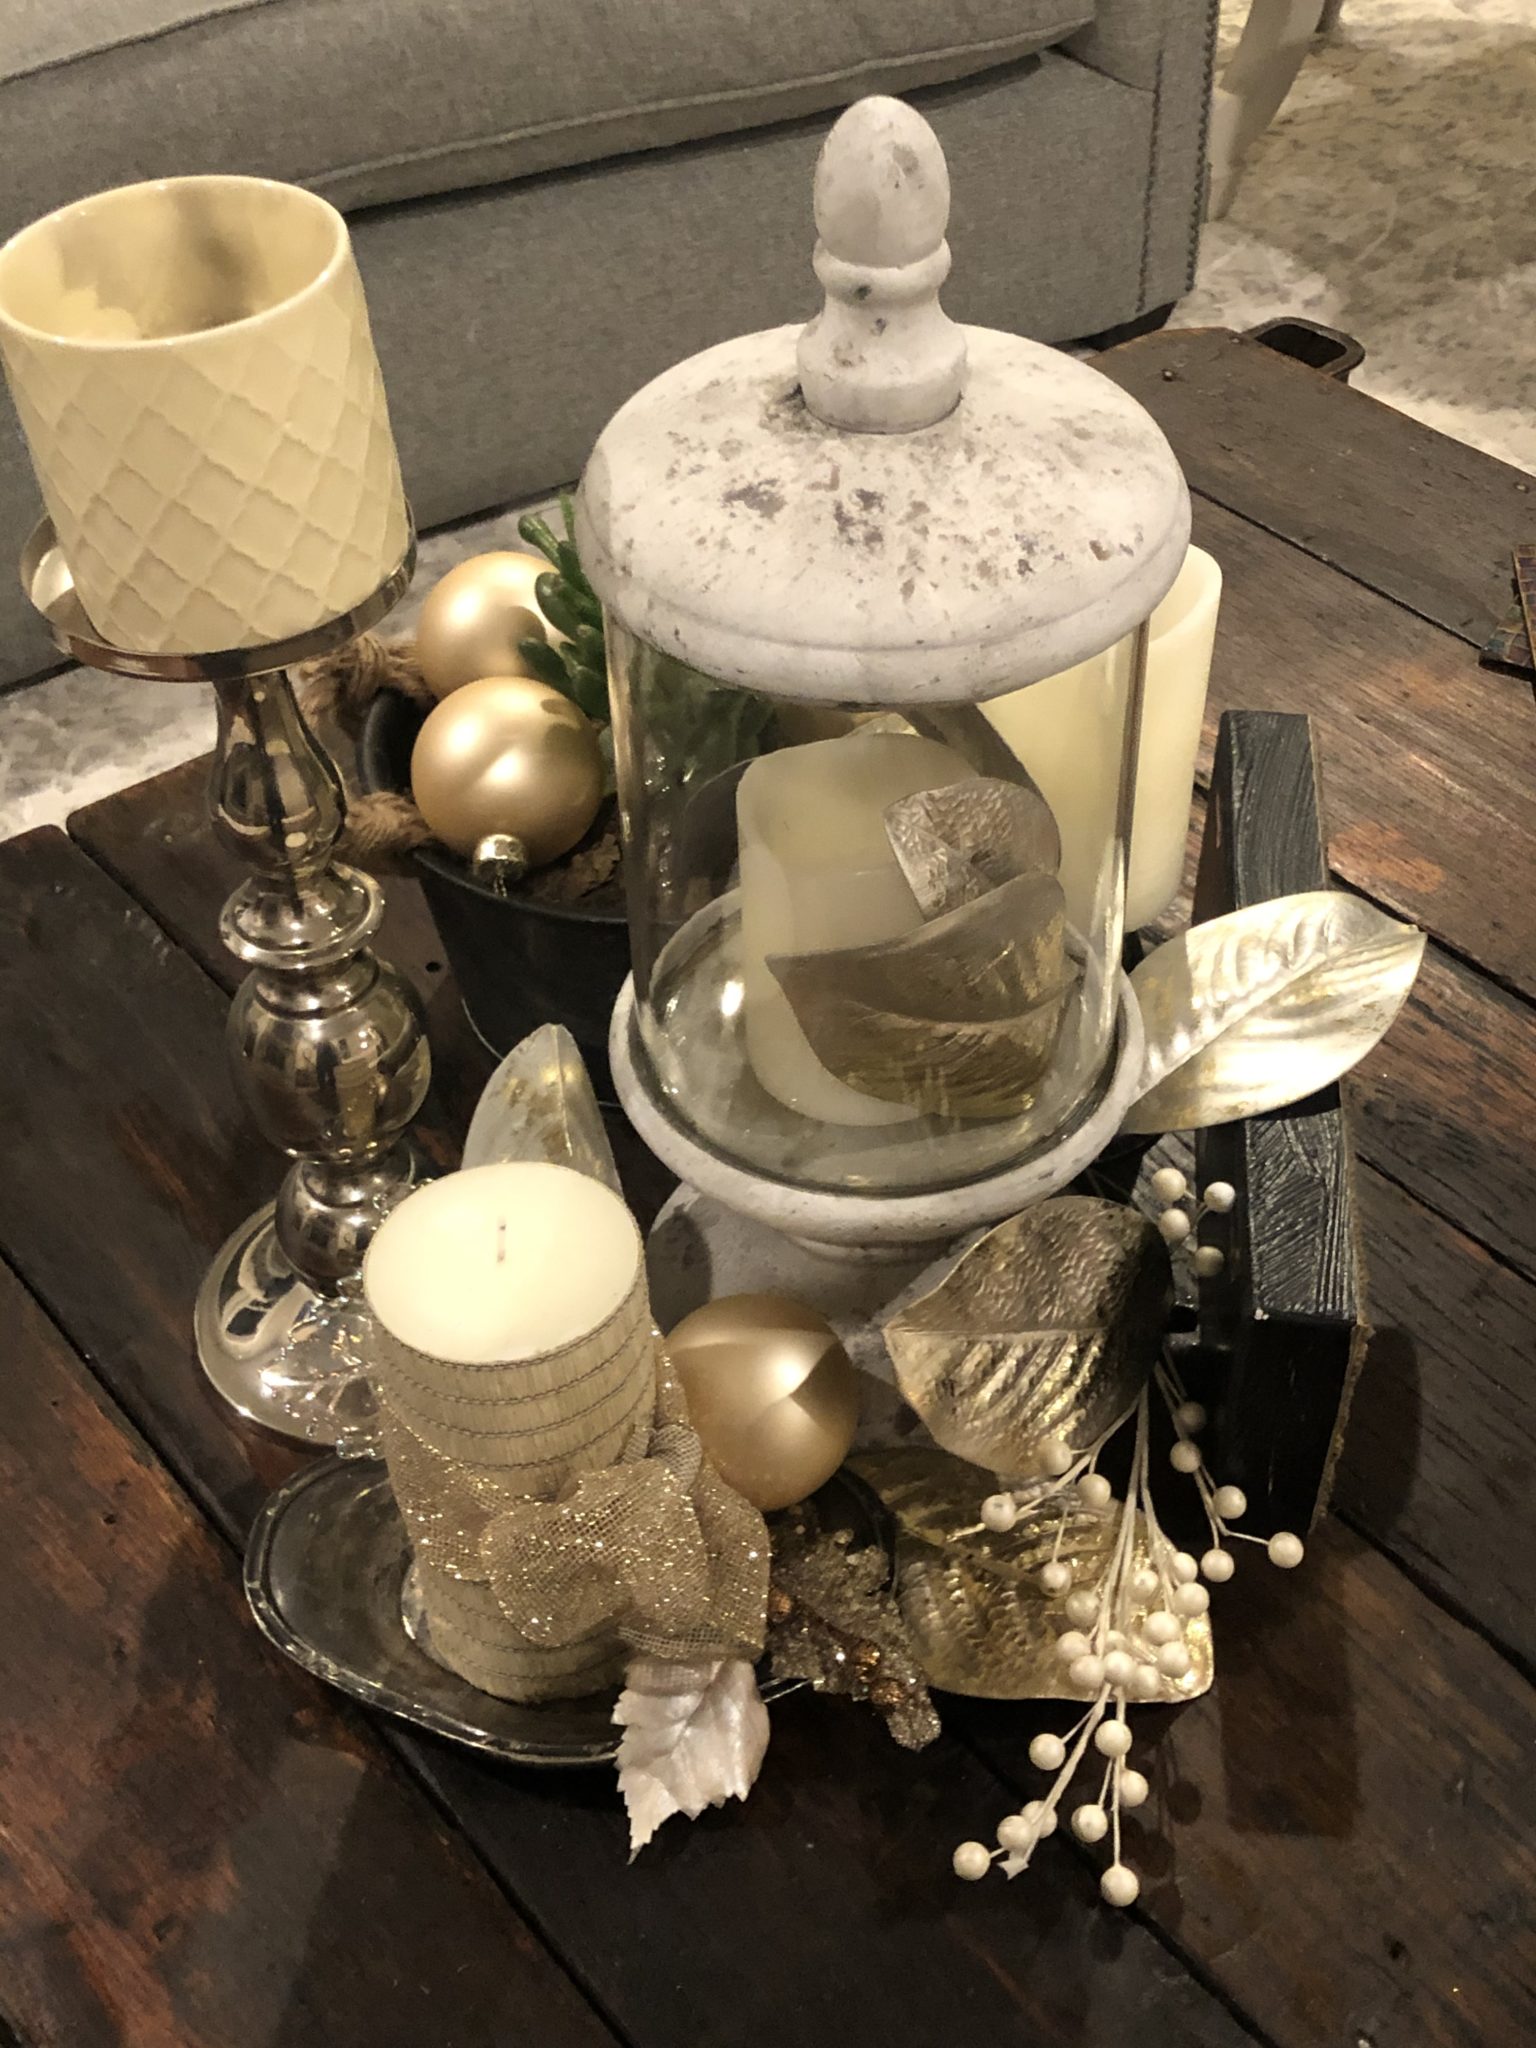 Decorative holiday candle arrangement on a table